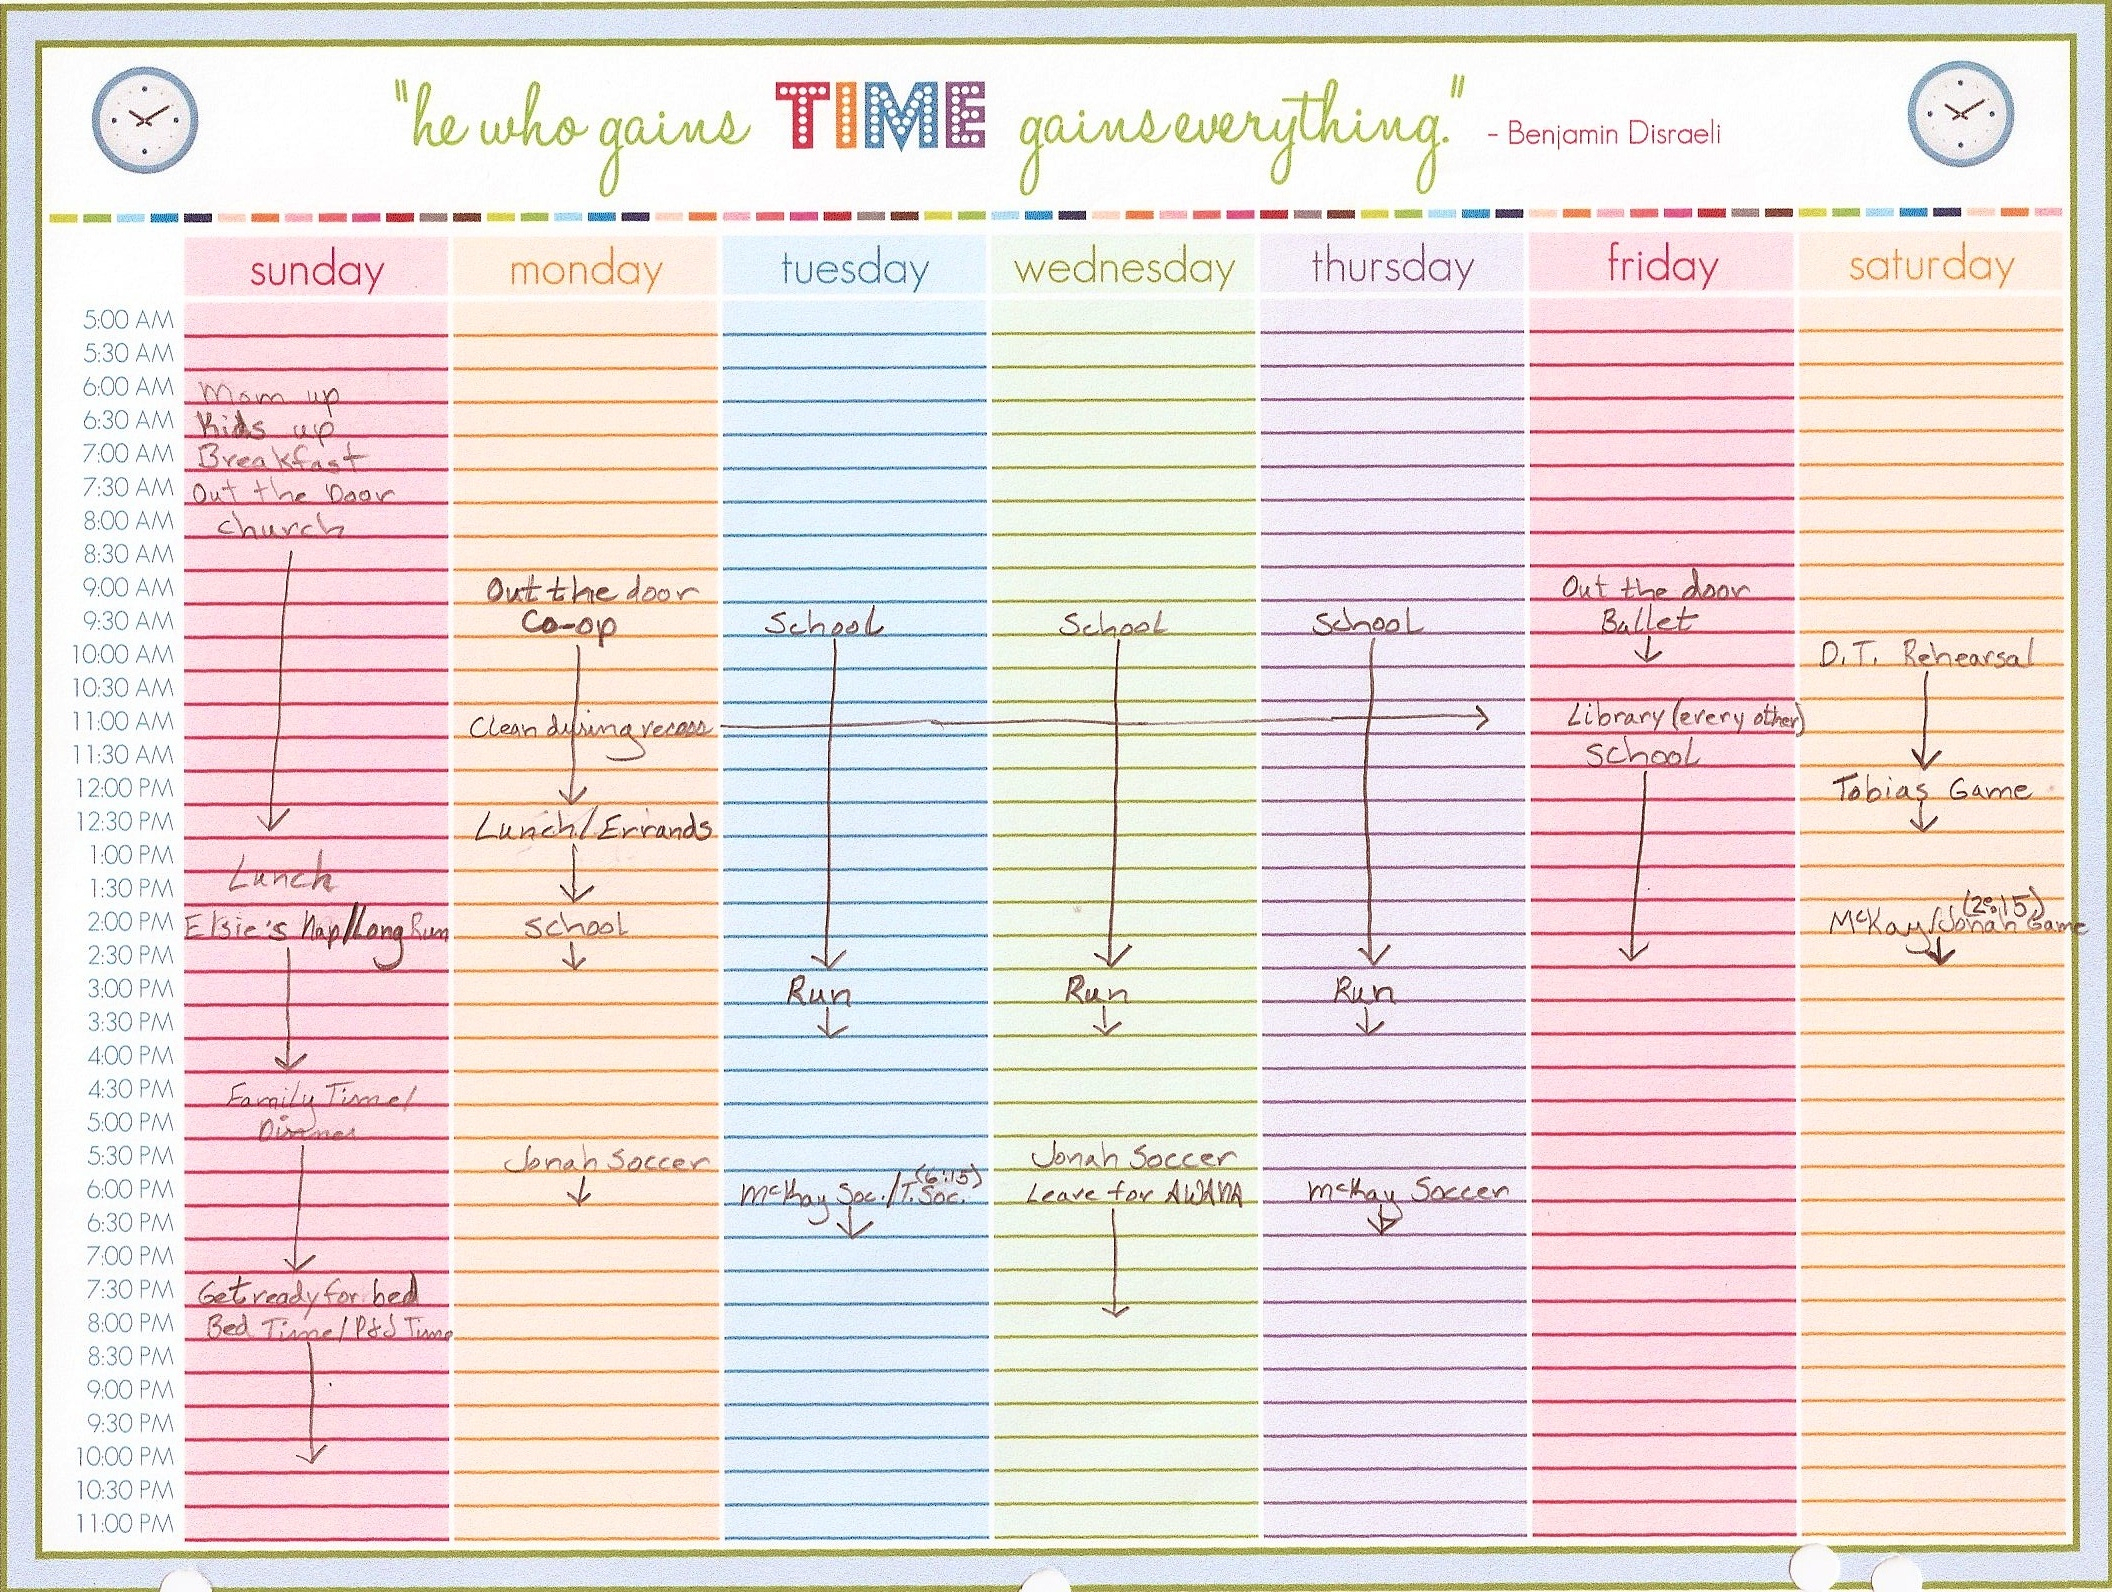 Free Calendar Template With Time Slots | Calendar Template within Free Weekly Calendar With Time Slots